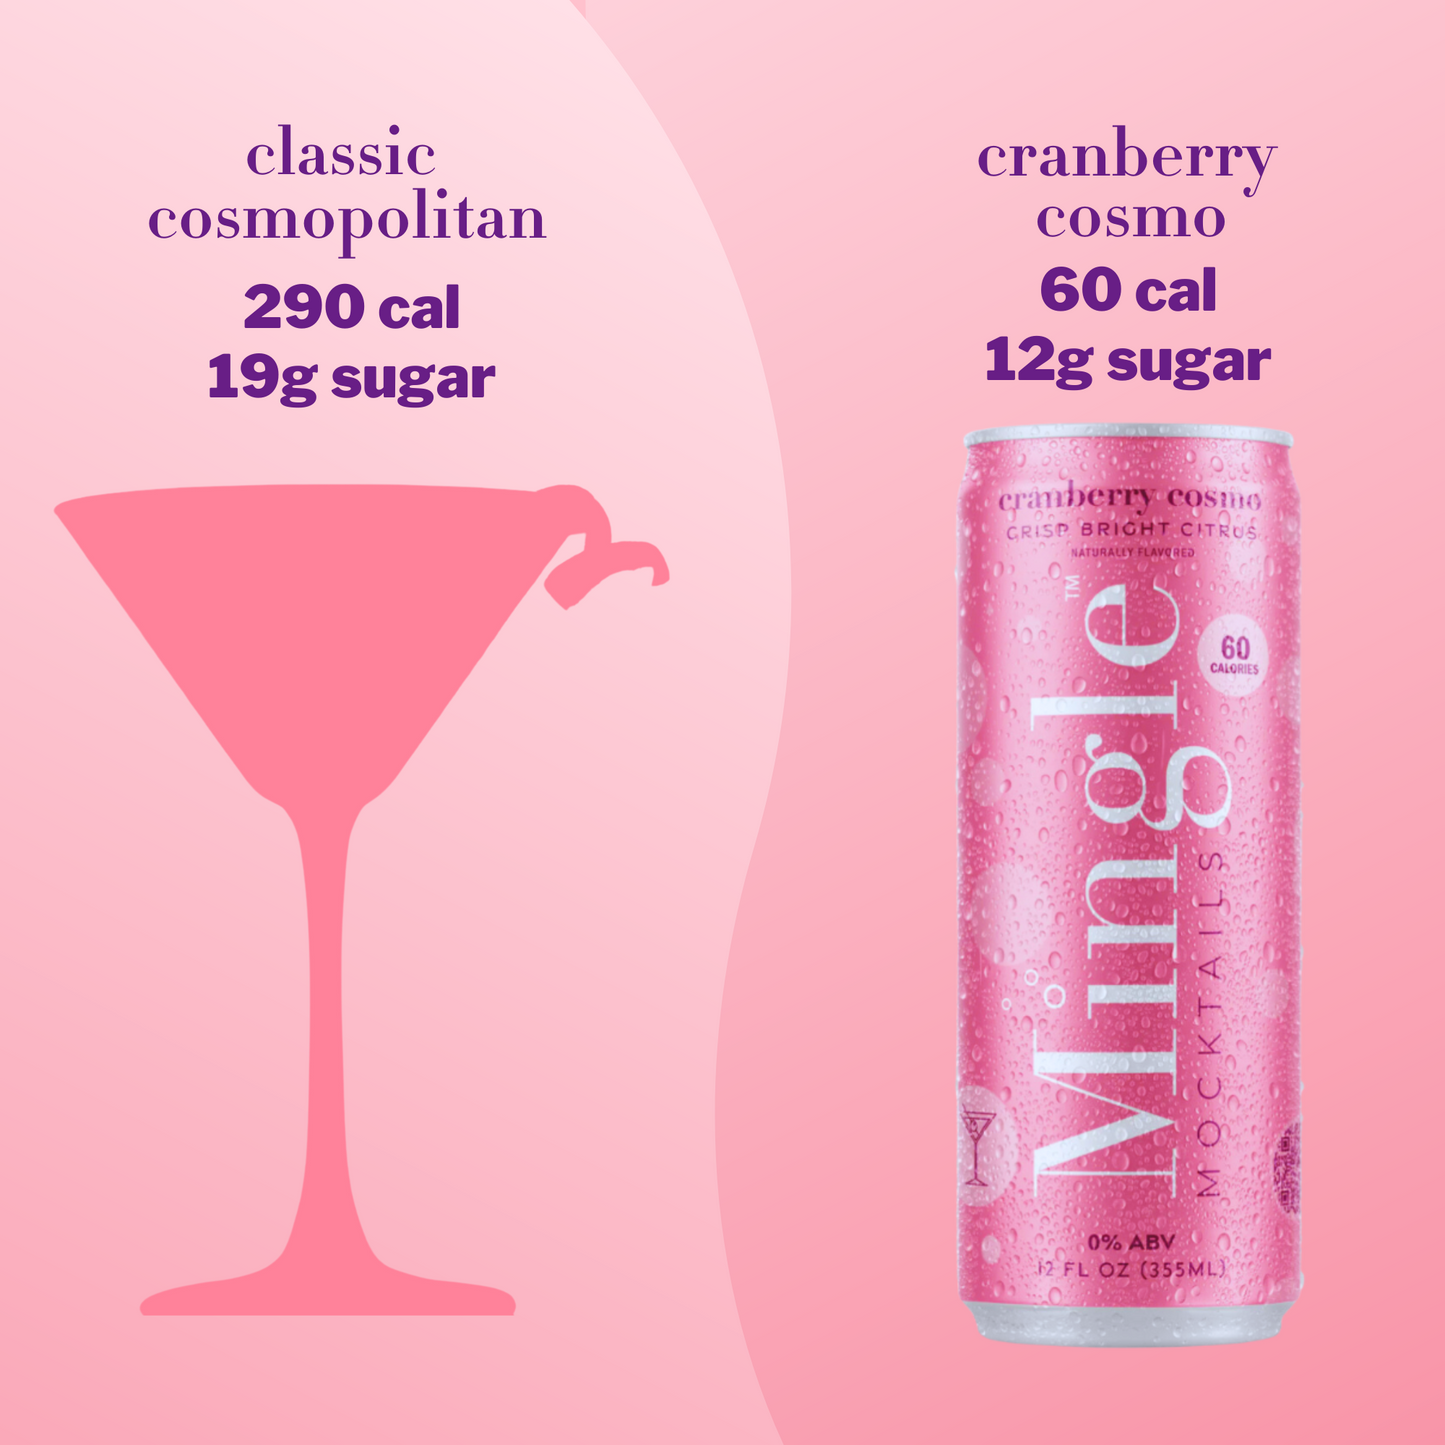 Cranberry Cosmo by Mingle Mocktails - Non Alcoholic Beverages